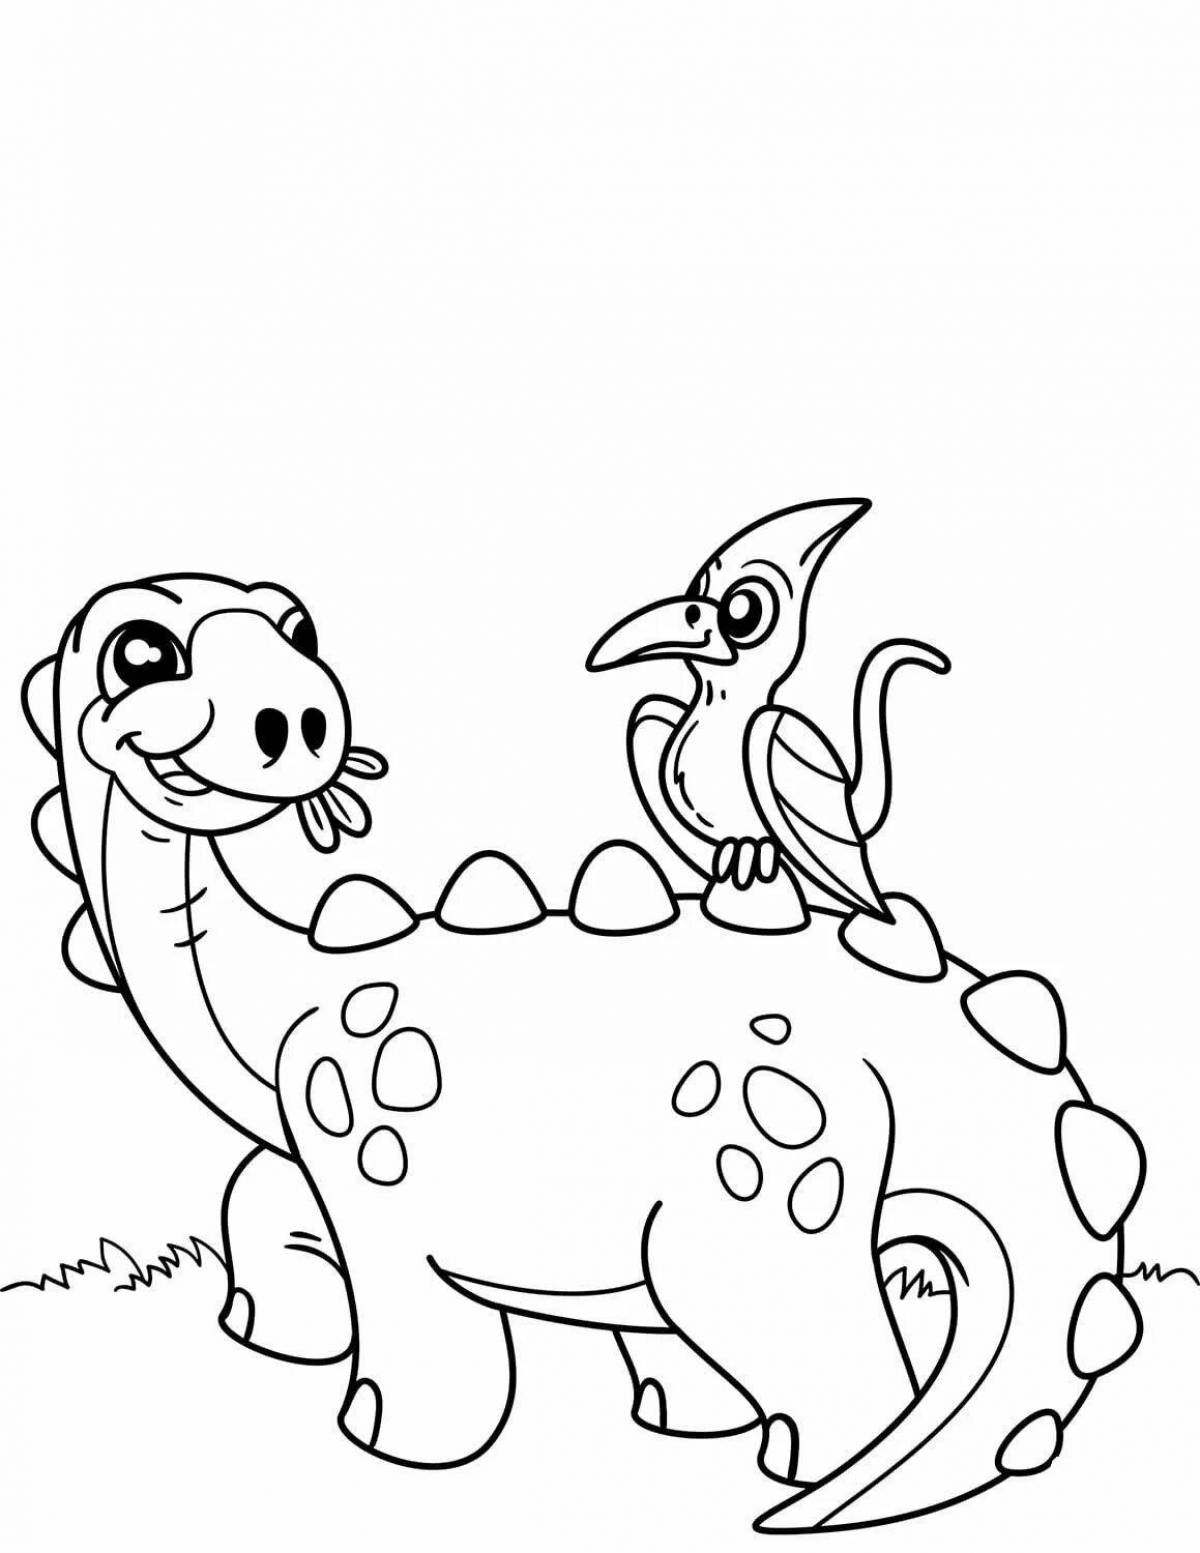 Coloring dinosaurs for kids